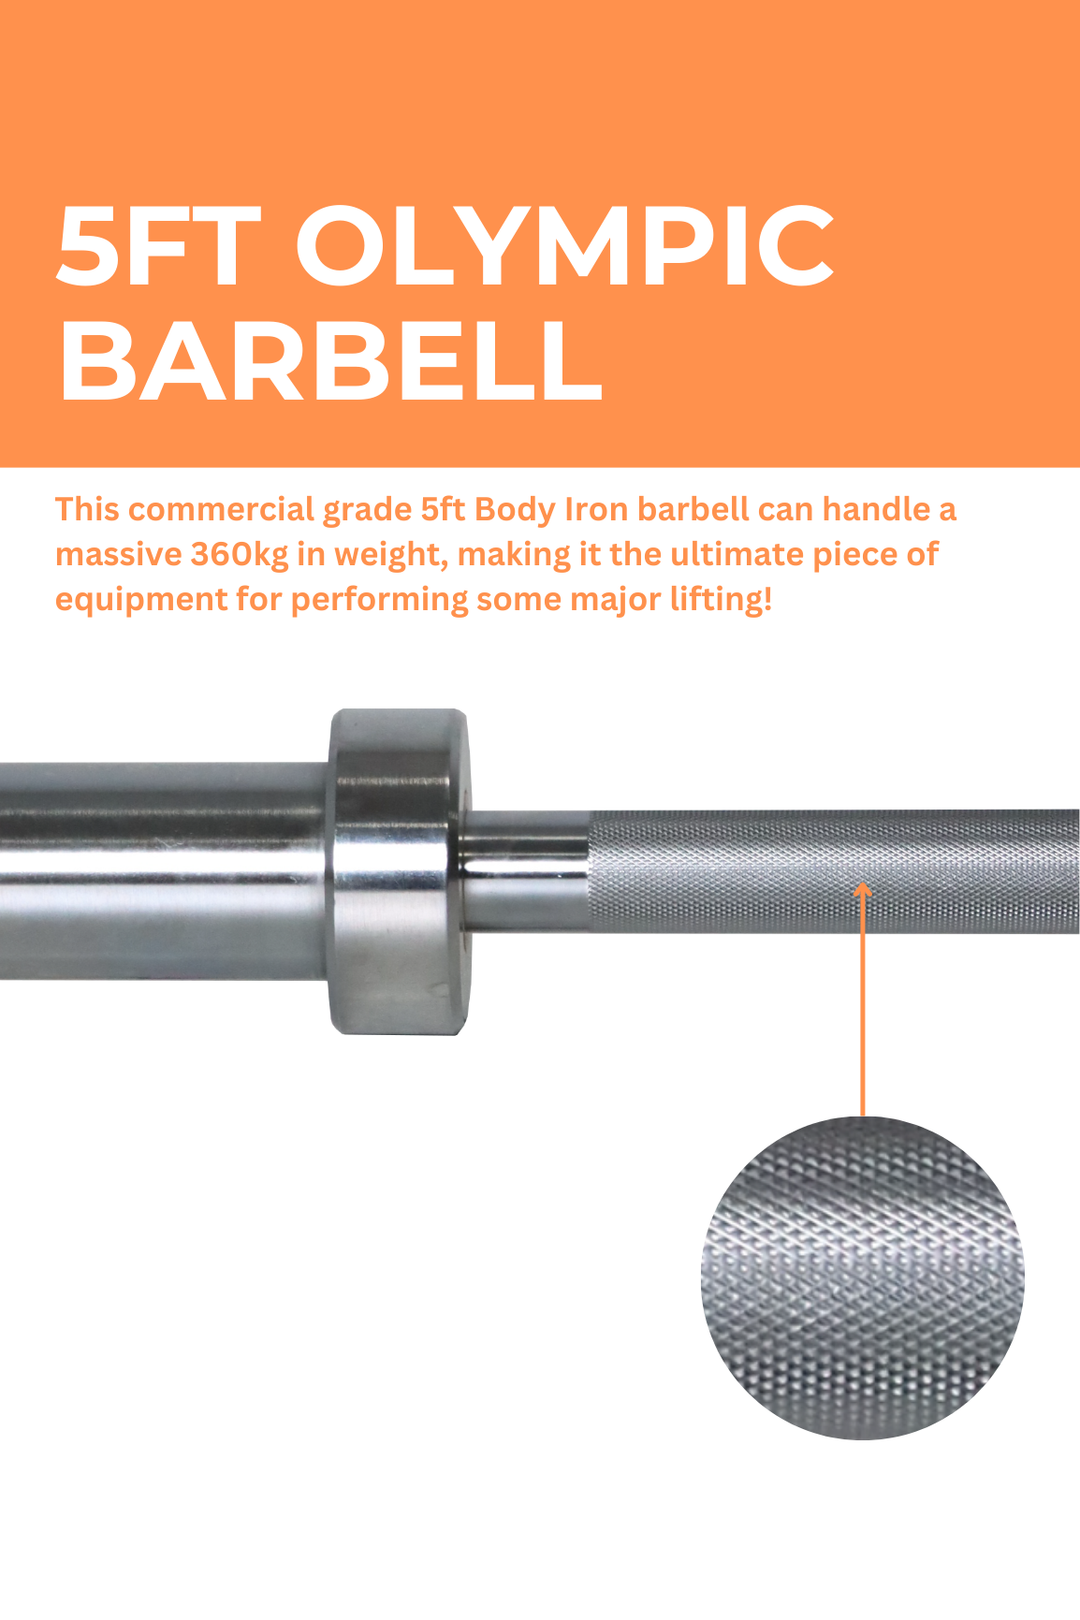 Body Iron Commercial 5ft Olympic Barbell